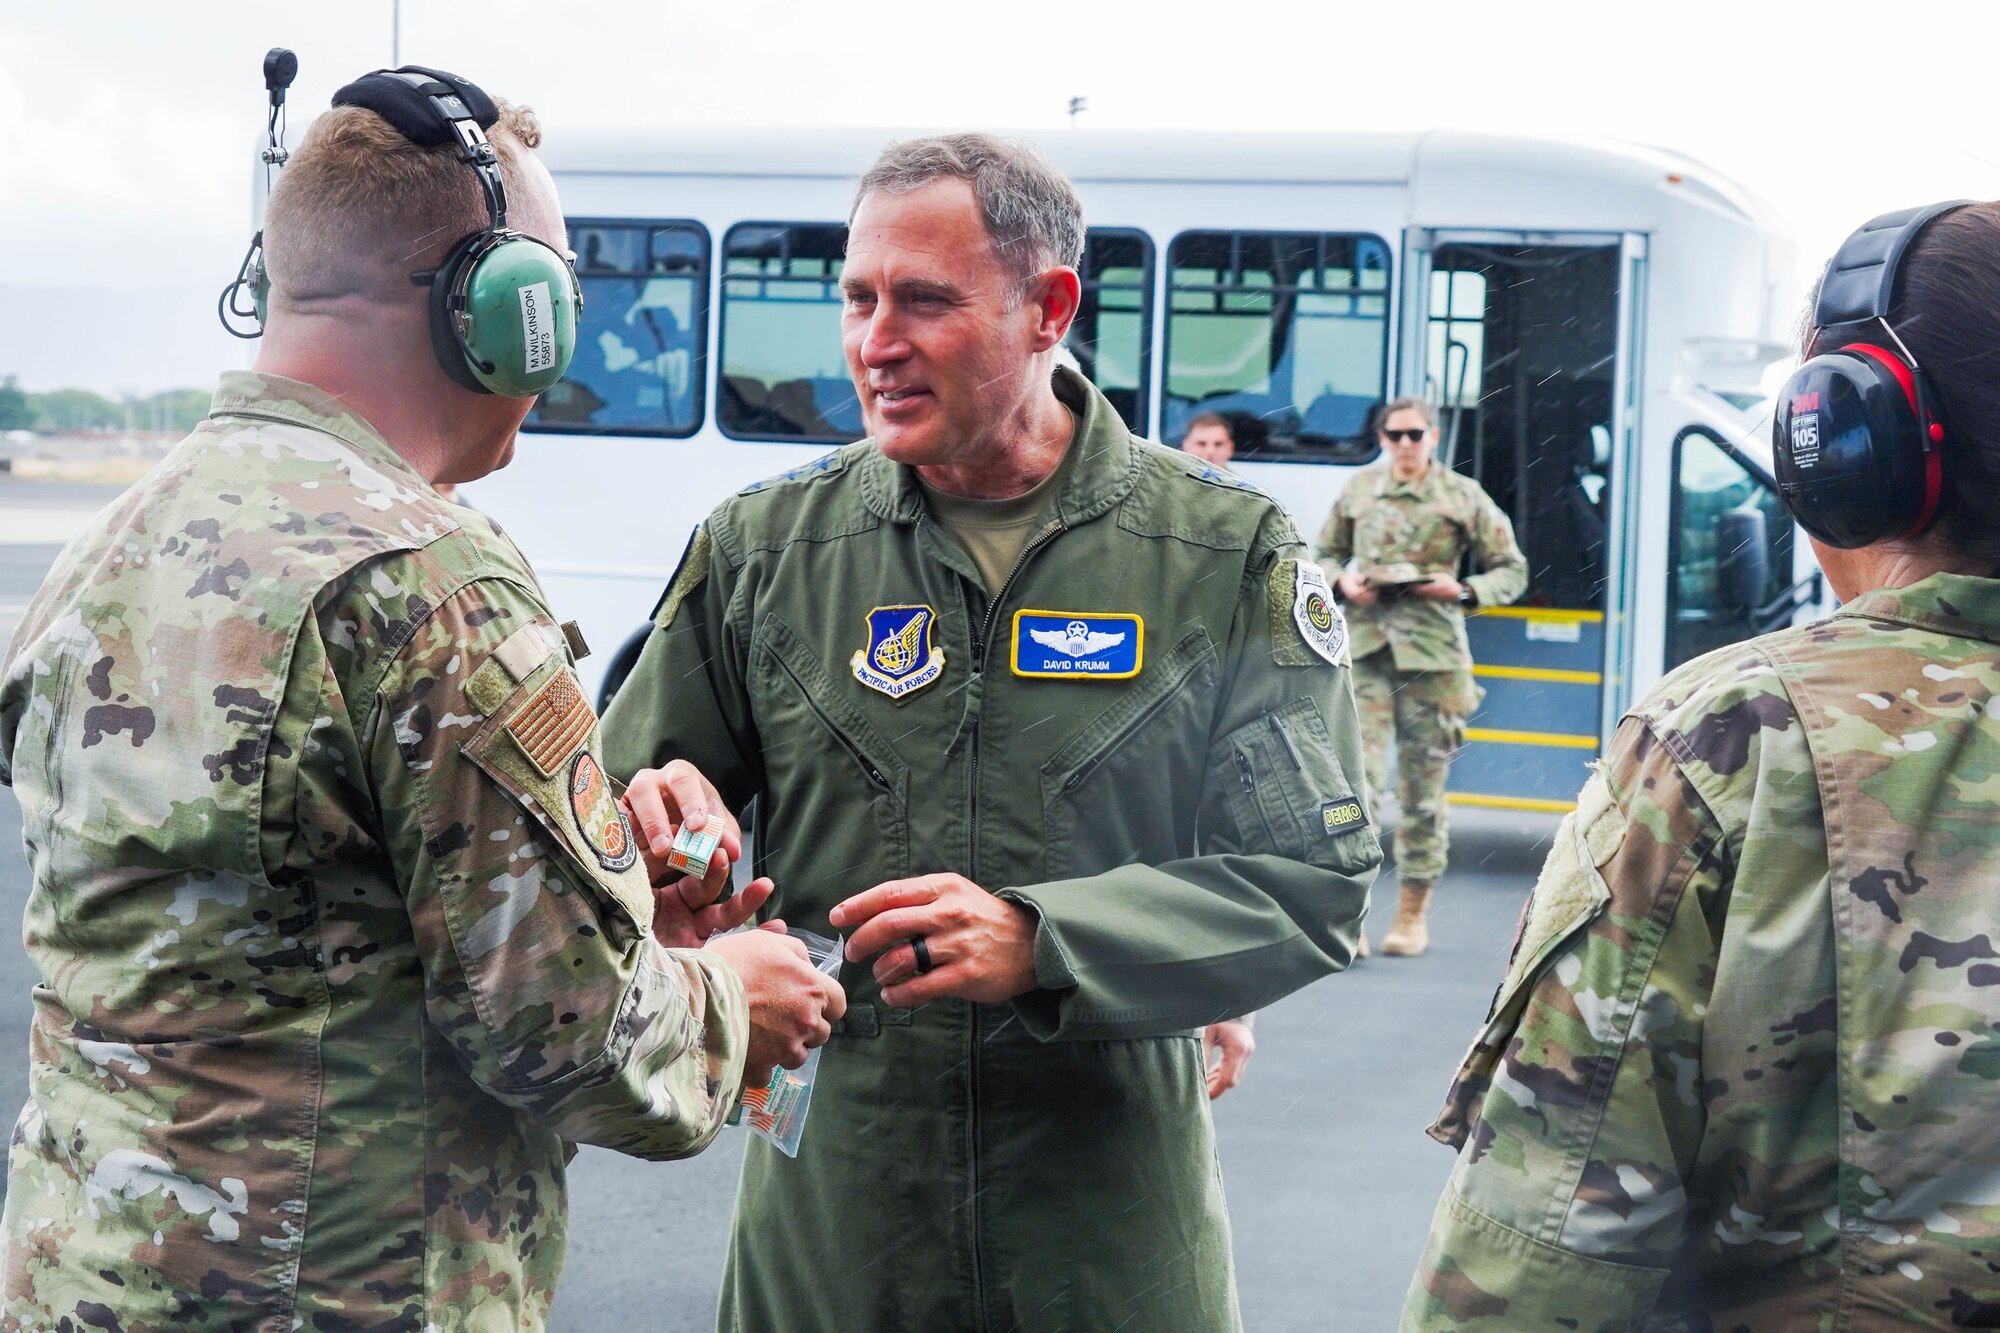 U.S. Air Force Lt. Gen. David A. Krumm, commander of Alaskan North American Aerospace Defense Command Region, Alaskan Command, and Eleventh Air Force, watches the Pacific Air Forces C-17 Demonstration Team conduct training operations at Marine Corps Base Hawaii, during his visit with Airmen assigned to Joint Base Pearl Harbor-Hickam, Hawaii, July 20, 2021.  Krumm visited several squadrons around the 15th Wing to gain an in-depth exposure to their unique mission and how the wing contributes to the Indo-Pacific region’s security and stability. (U.S. Air Force photo by Airman 1st Class Makensie Cooper)